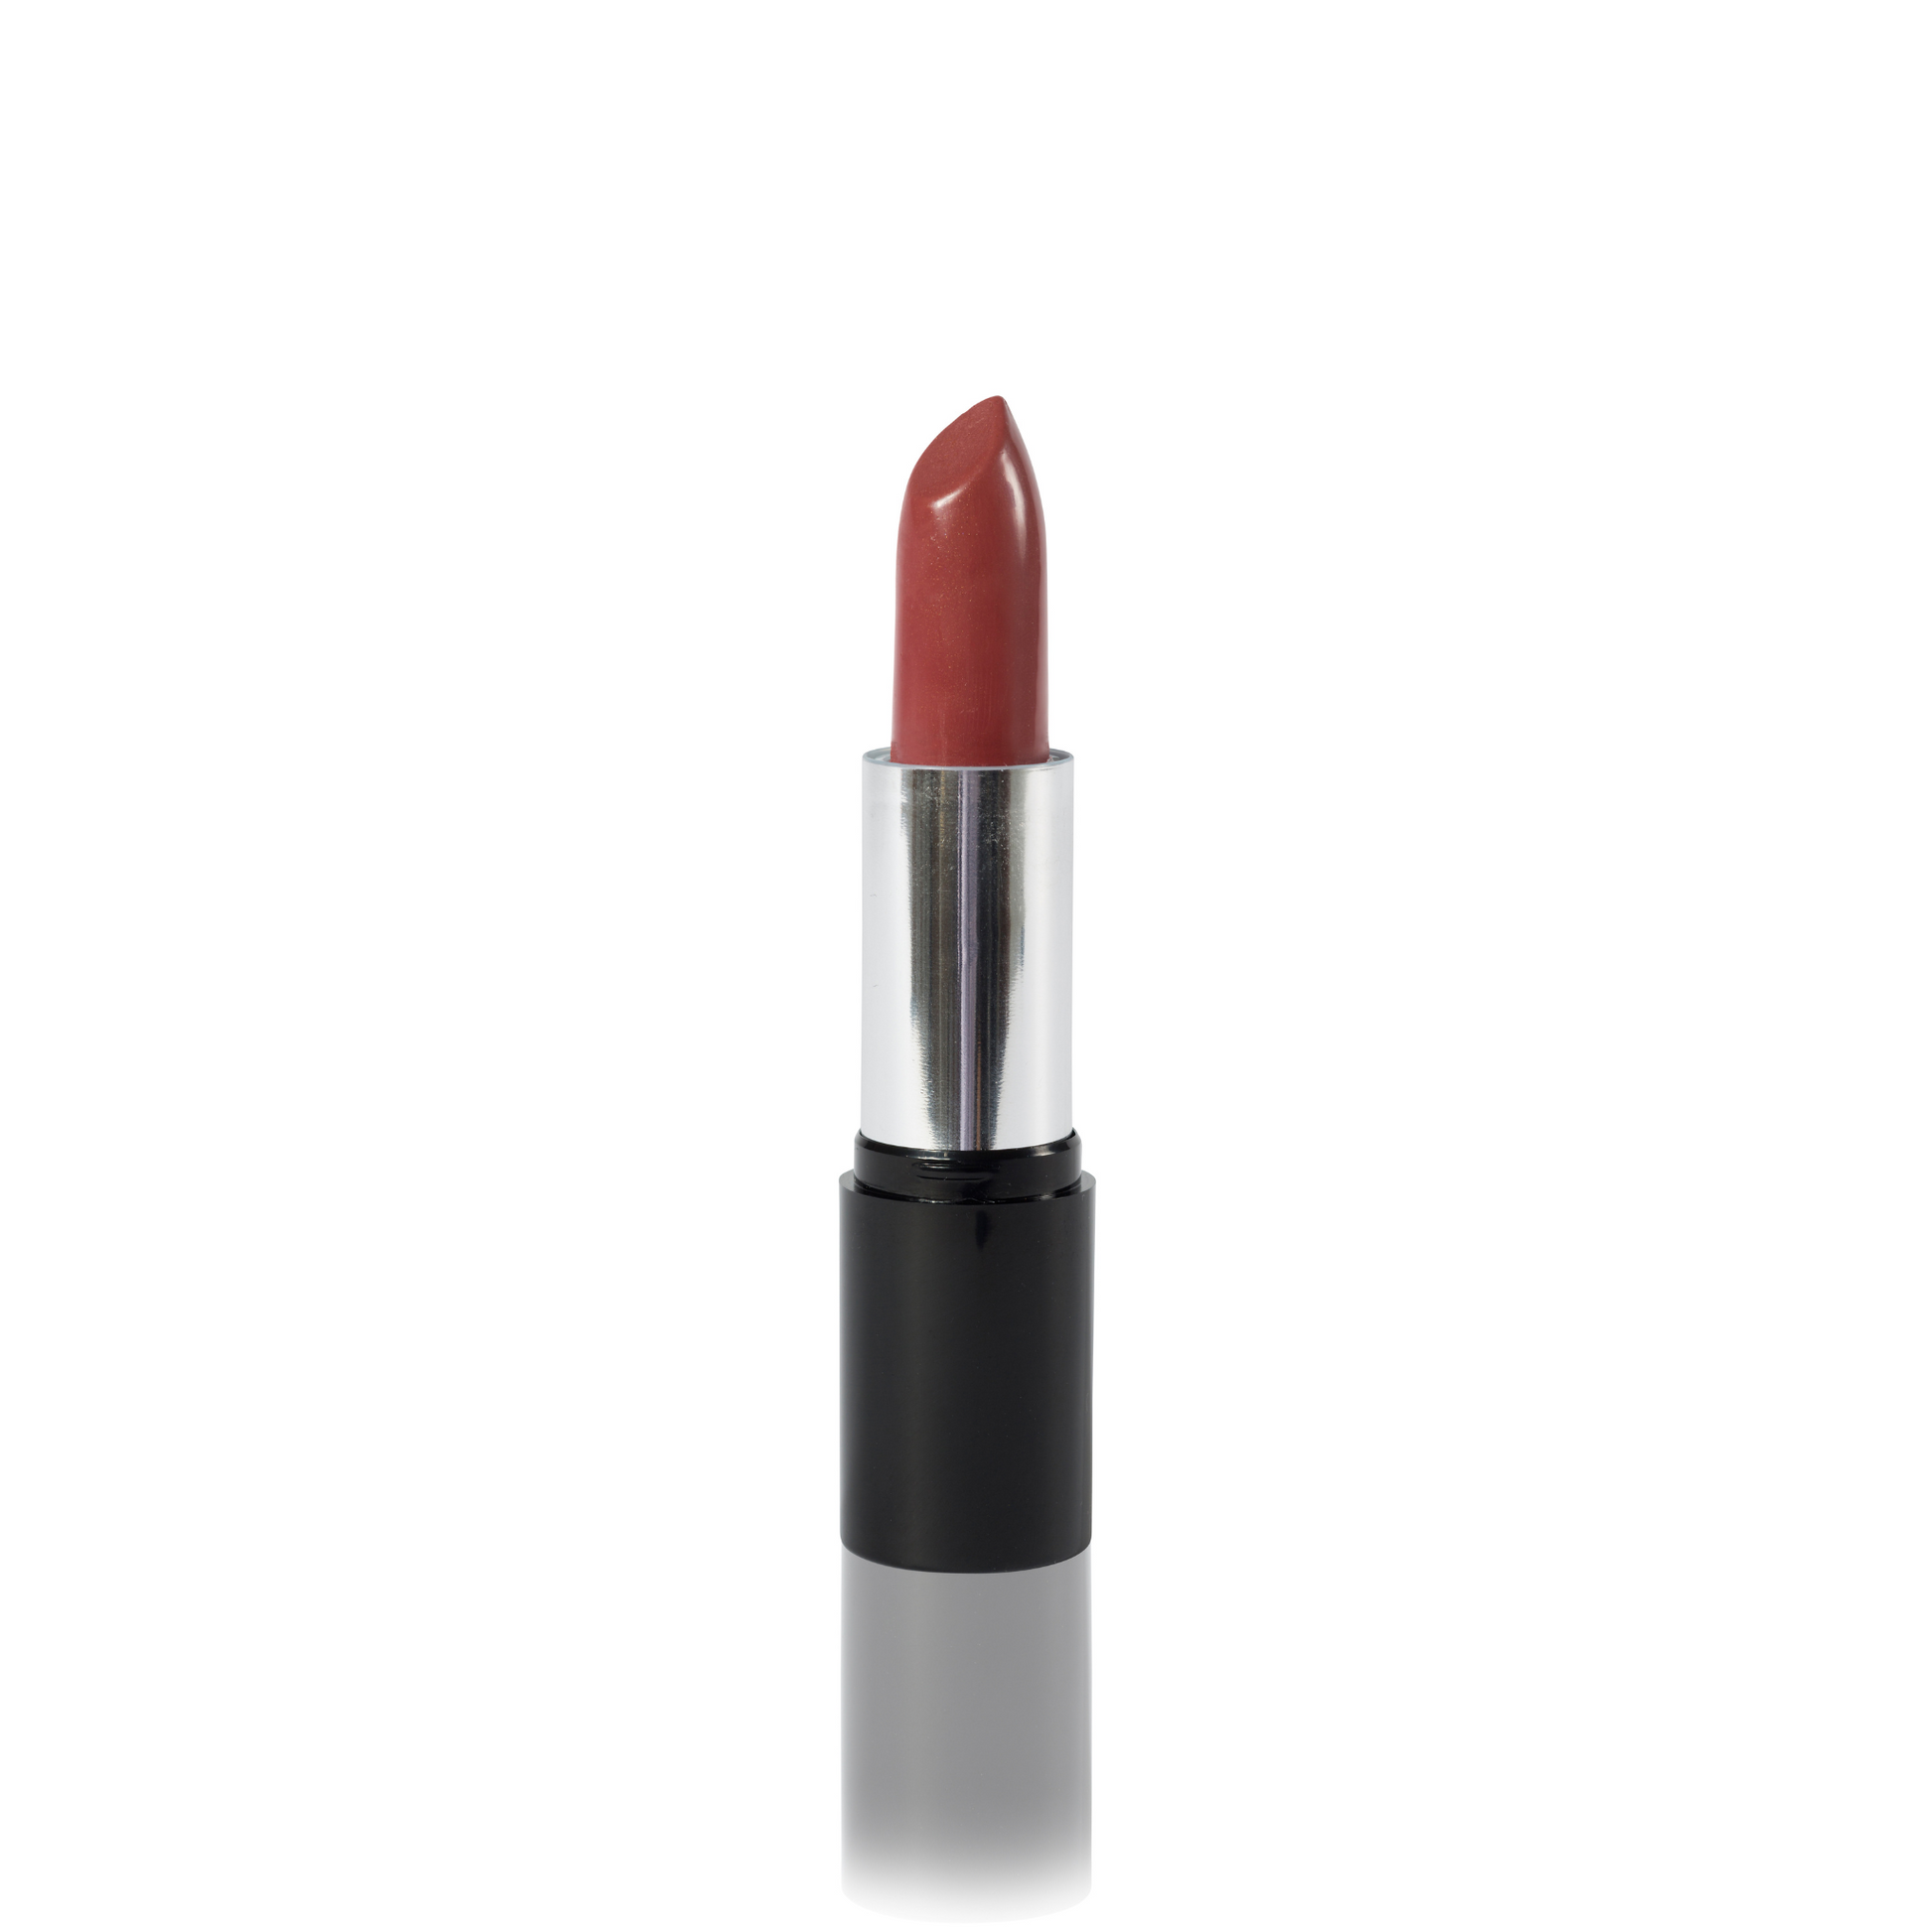 A single tube of the odylique fig fondant lipstick with the cap removed, revealing the warm burnished pinkshade, set against a plain white background.